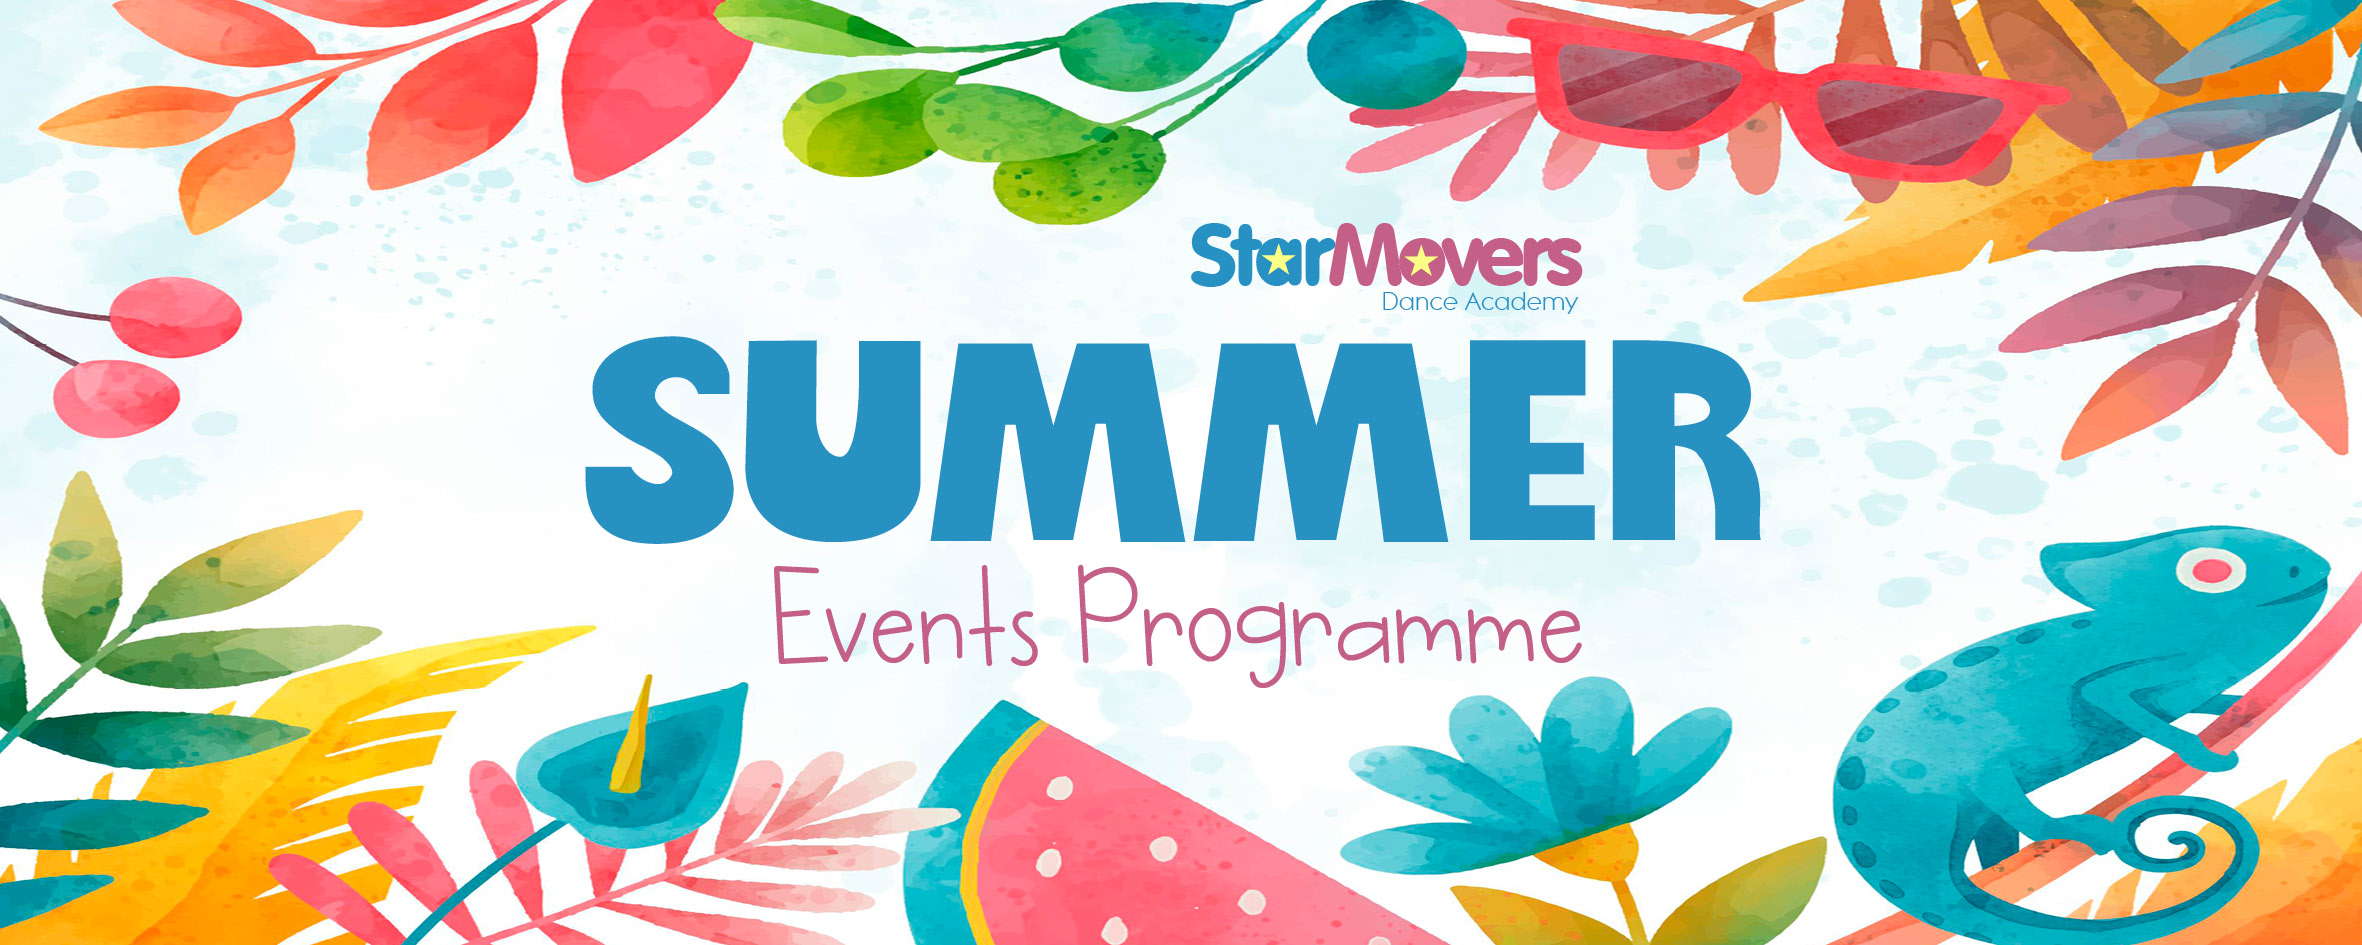 Summer Events Banners 20212